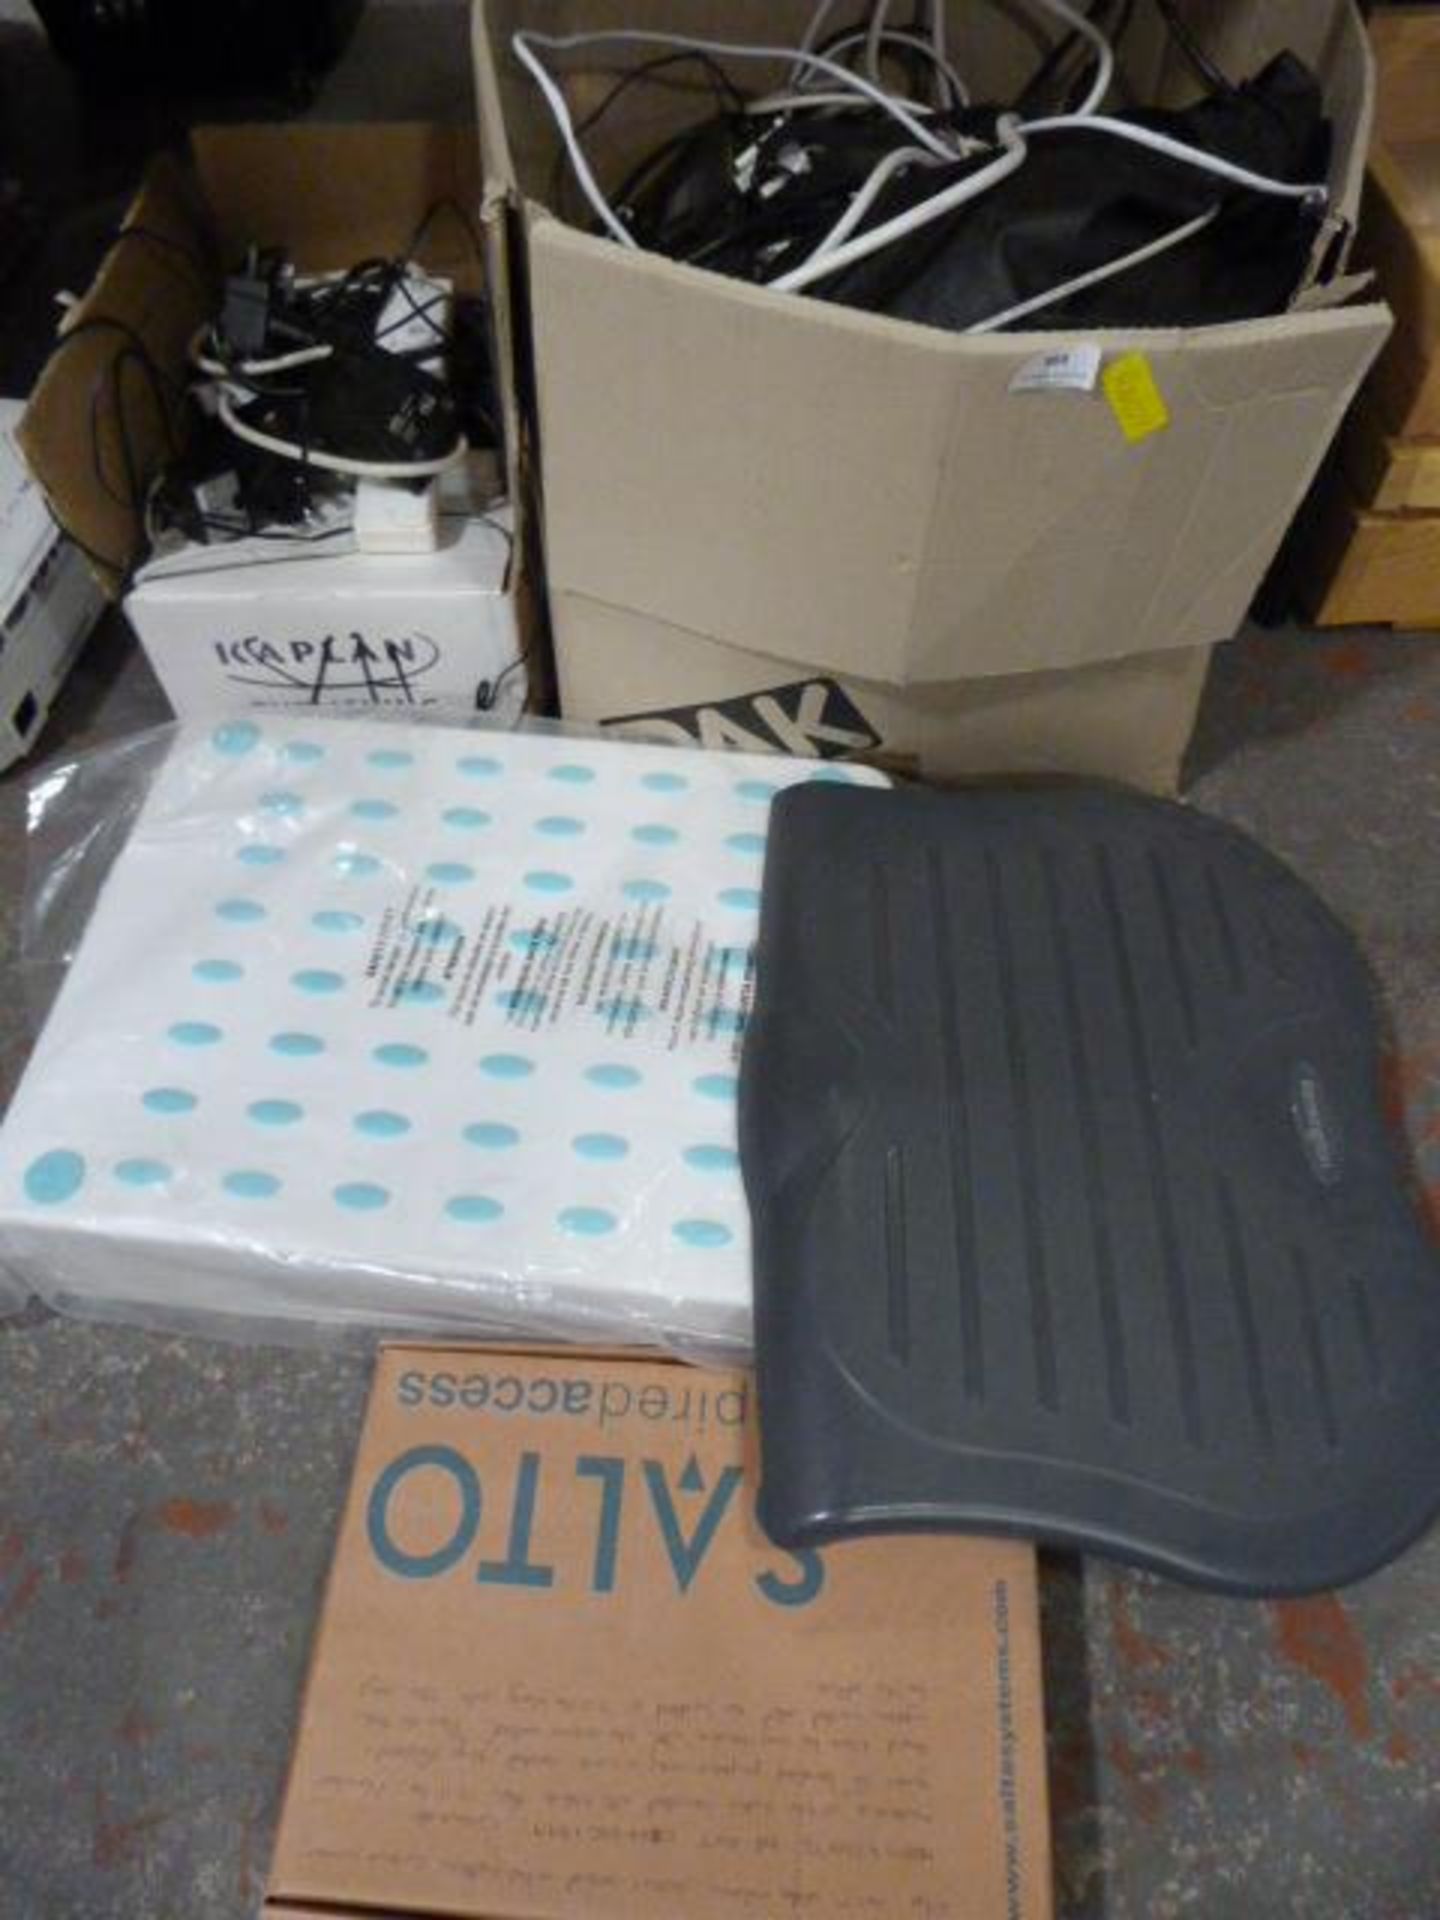 *Two Miscellaneous Boxes Containing Chargers, Wires, Routers, etc.